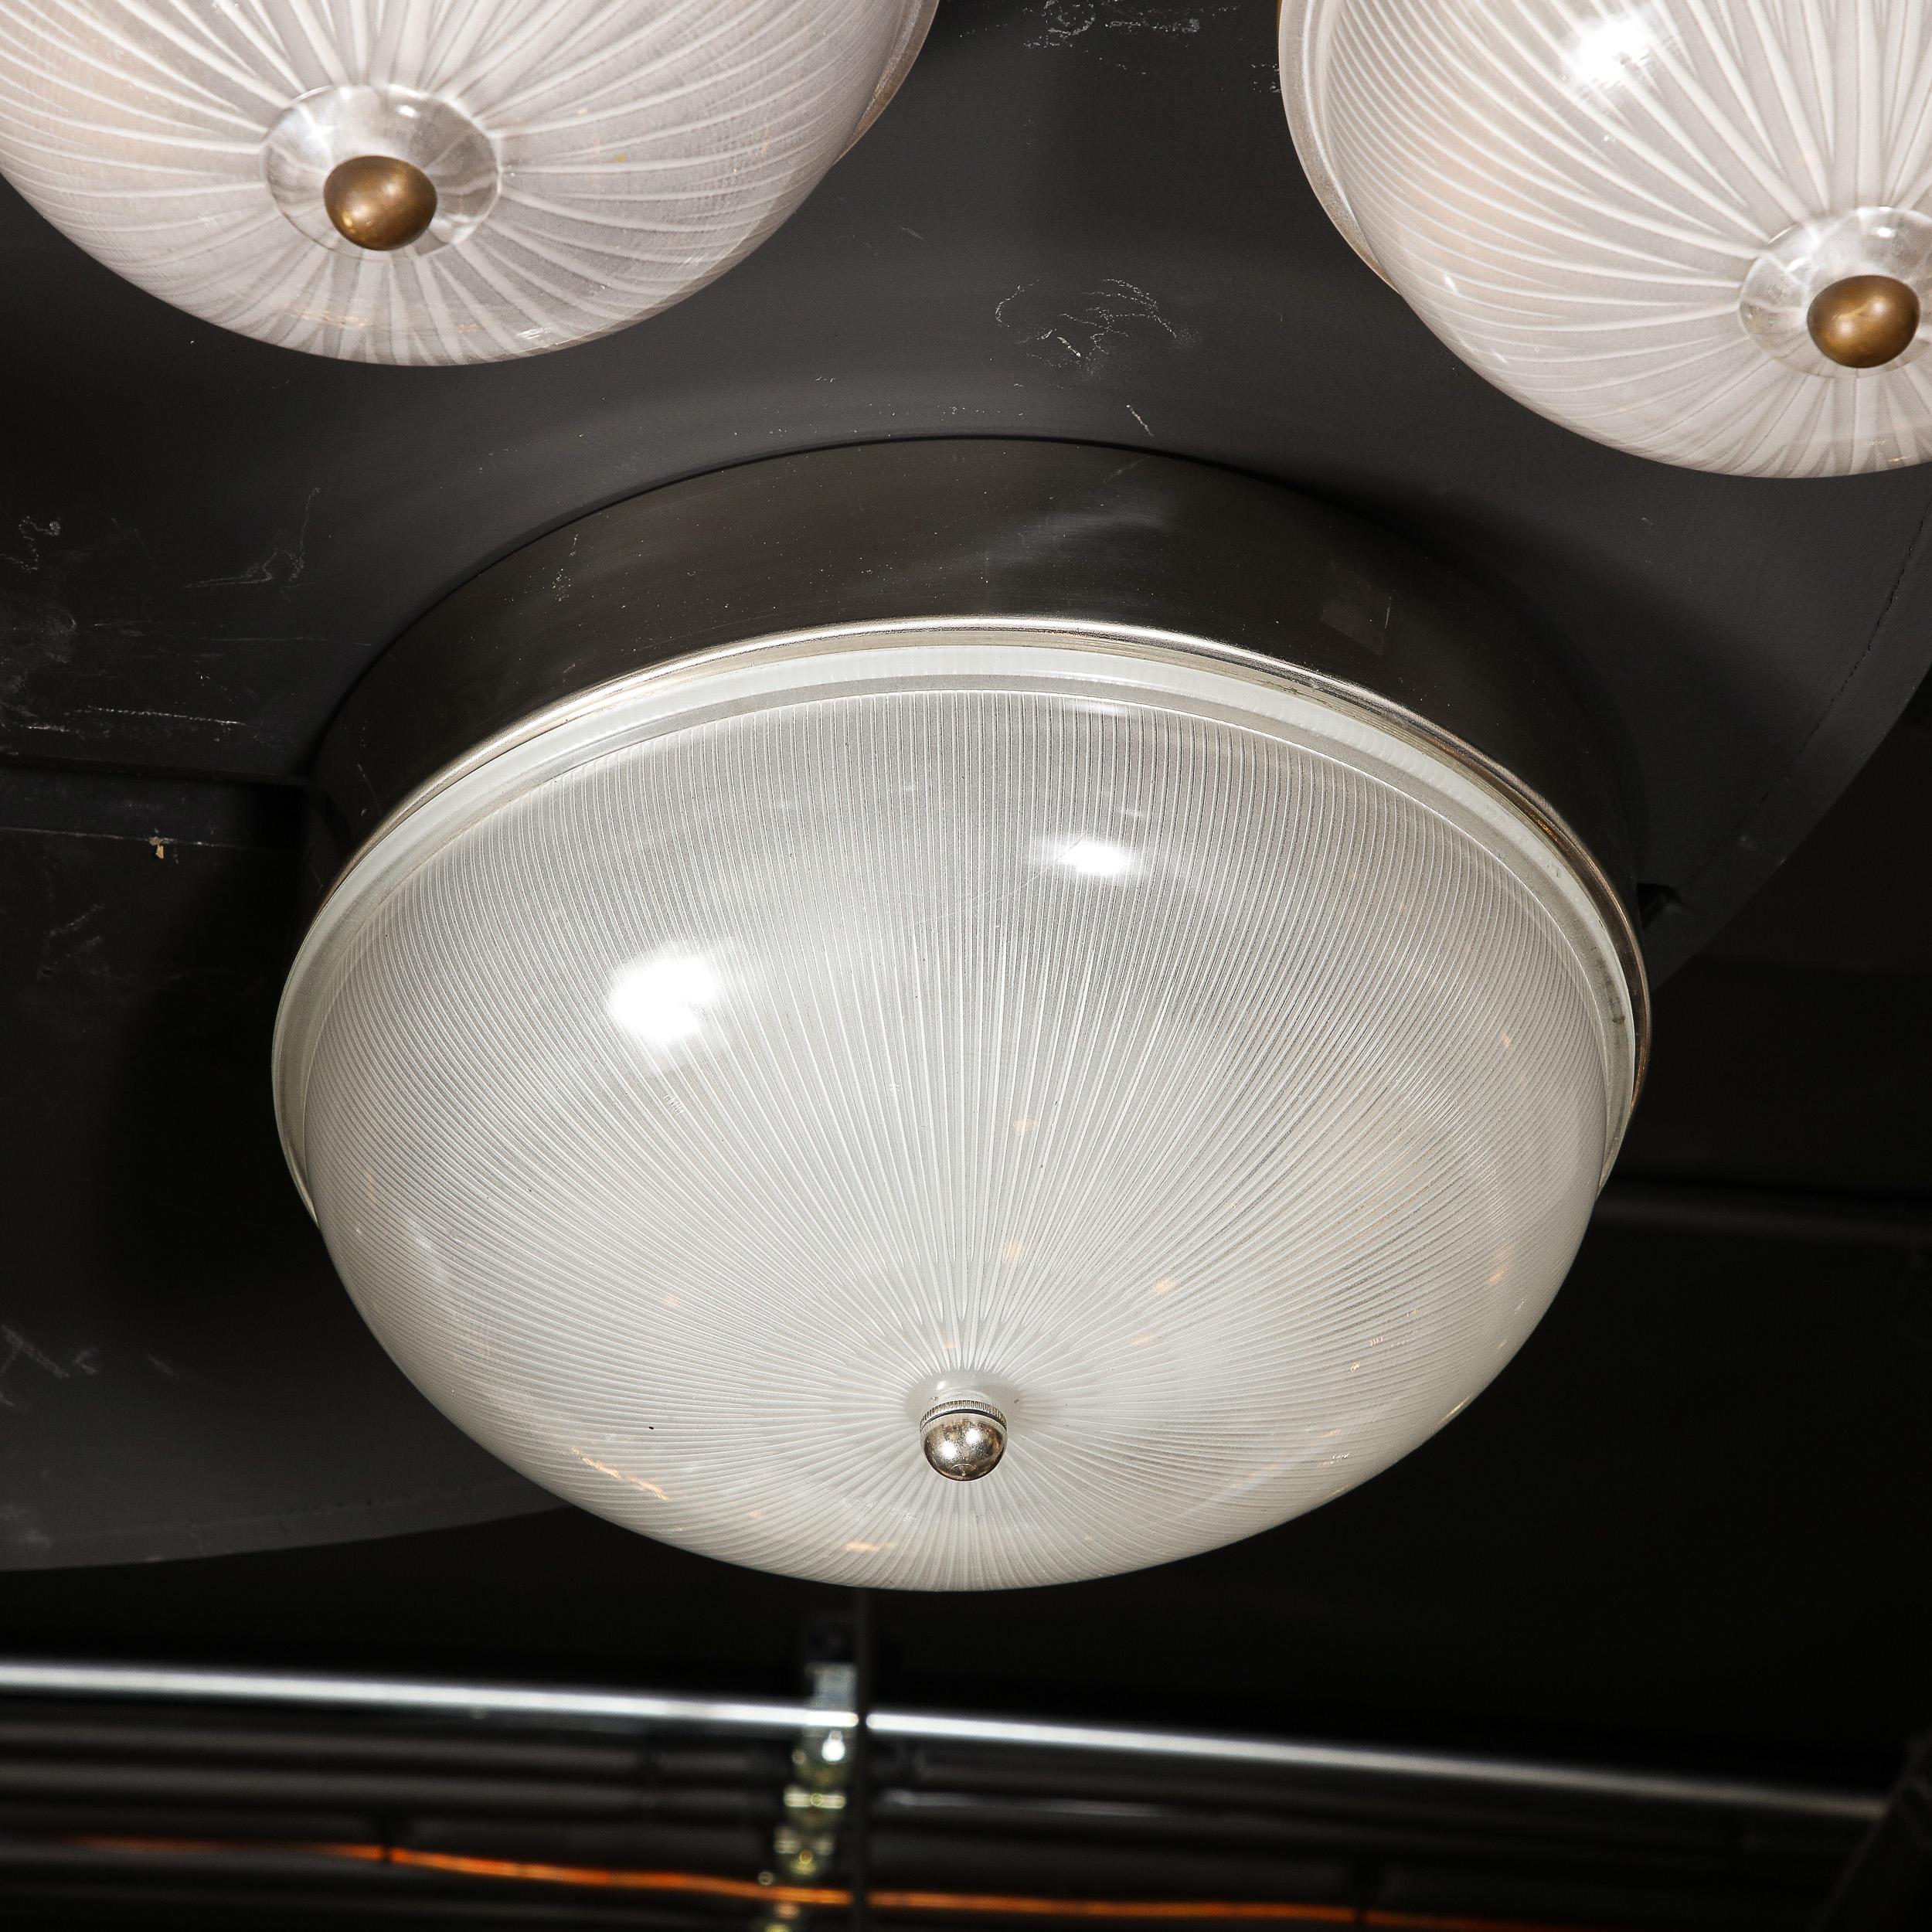 This elegant Mid-Century Modern flush mount chandelier was realized in Czechoslovakia circa 1950. It features a convex domed body with a striated starburst pattern embedded in the glass- consisting of an abundance of rays exploding from the center